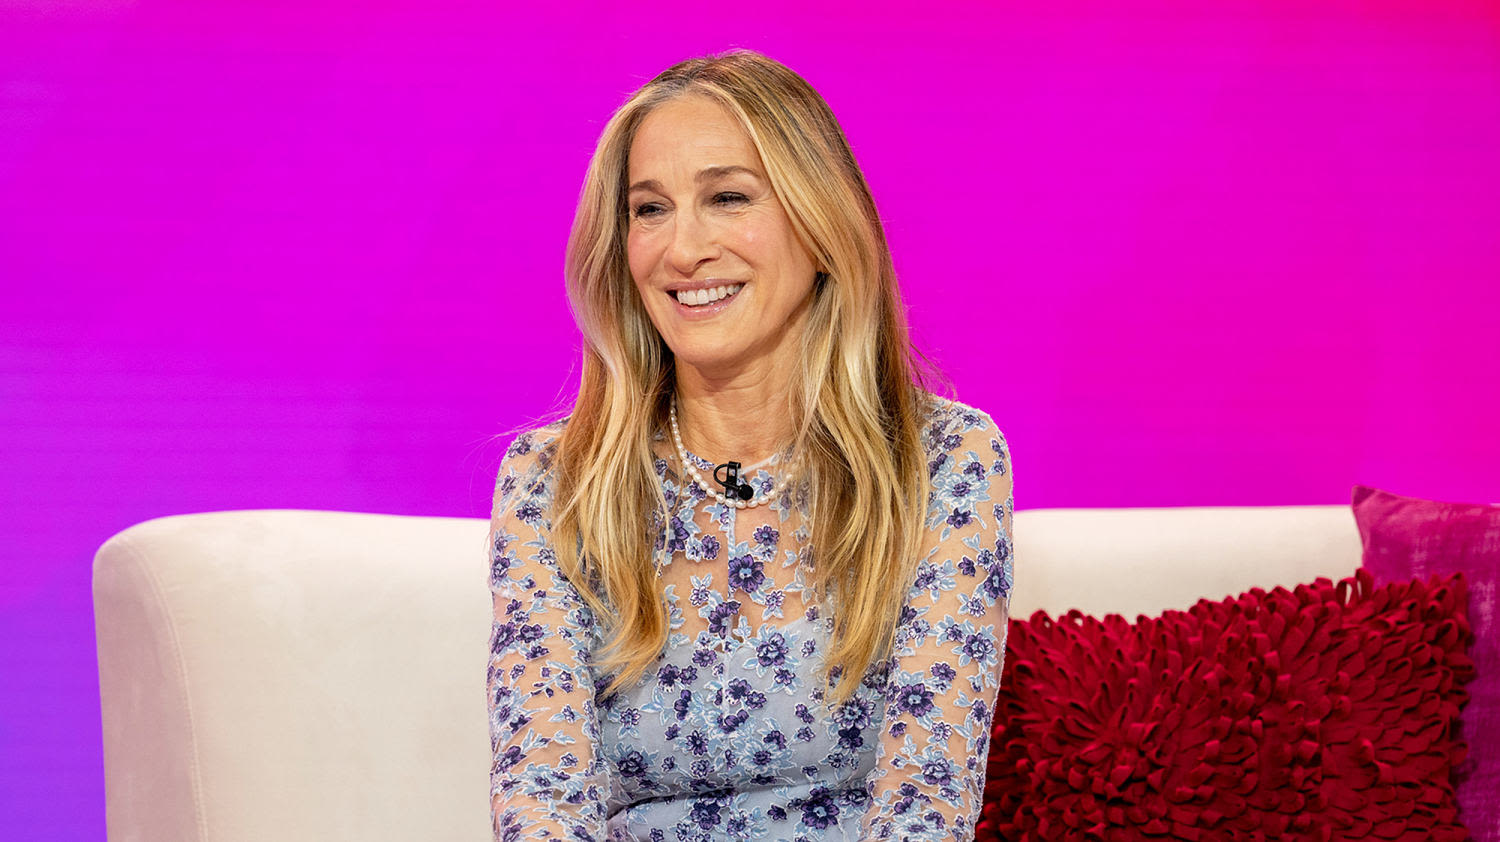 Sarah Jessica Parker started her own book imprint. What's she looking for in a read?